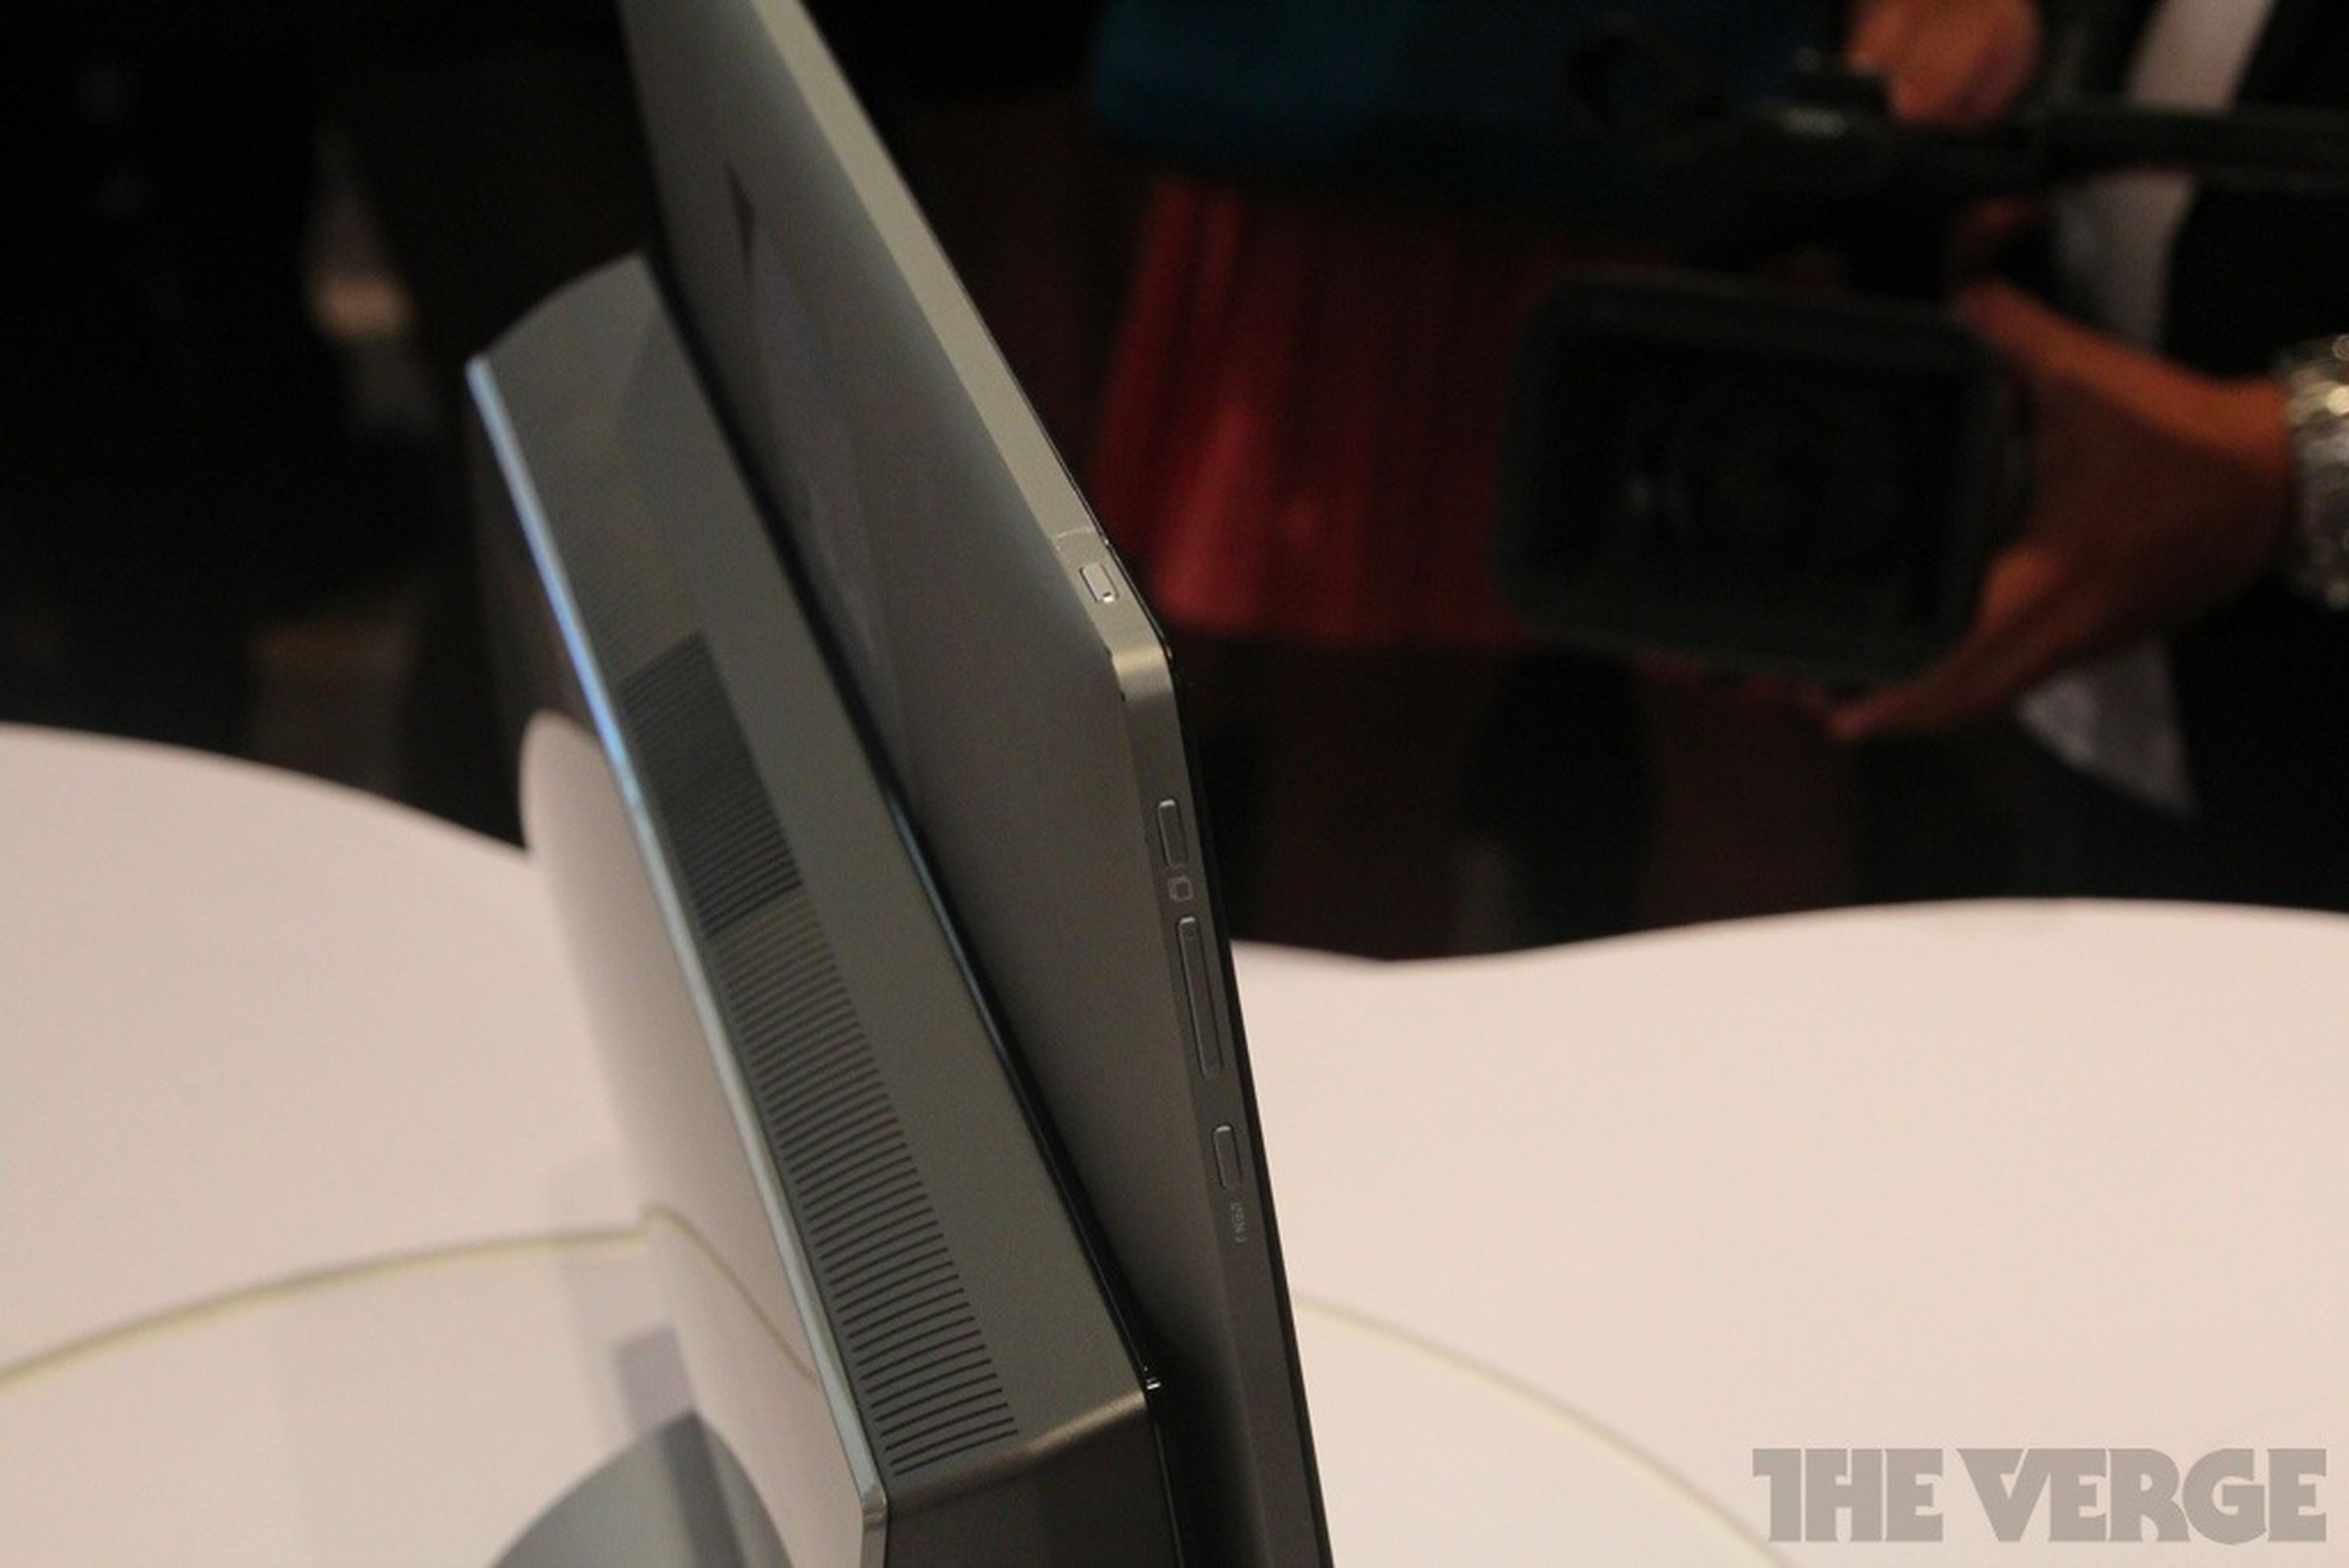 Asus Transformer all-in-one photos